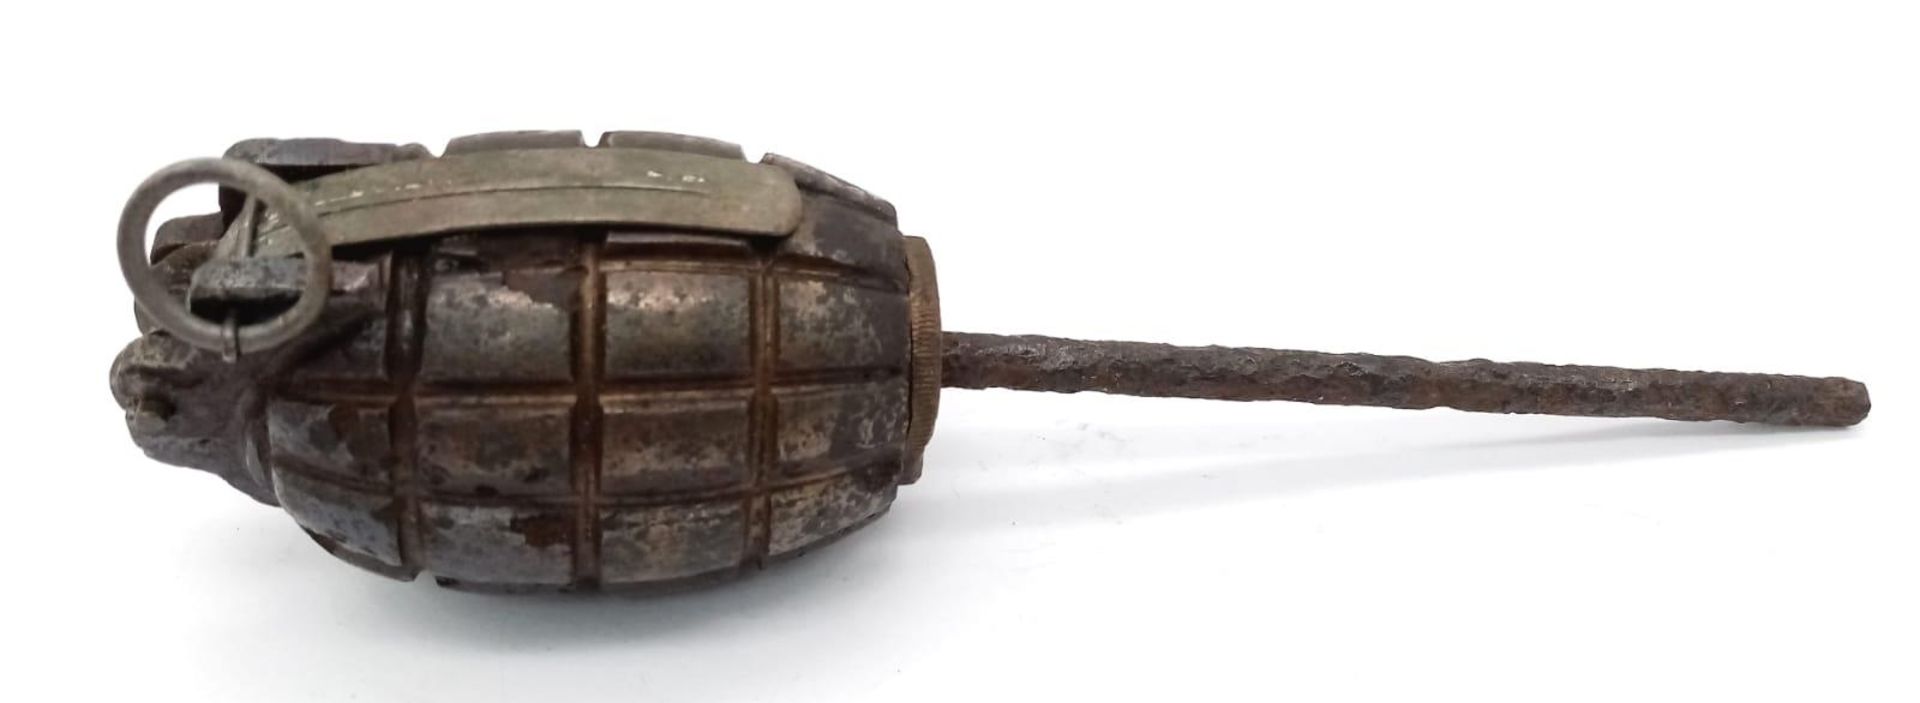 INERT. WW1 British N° 23 Rifle Grenade with Inner and Rod Base Dated 1916. H & T Vaughan